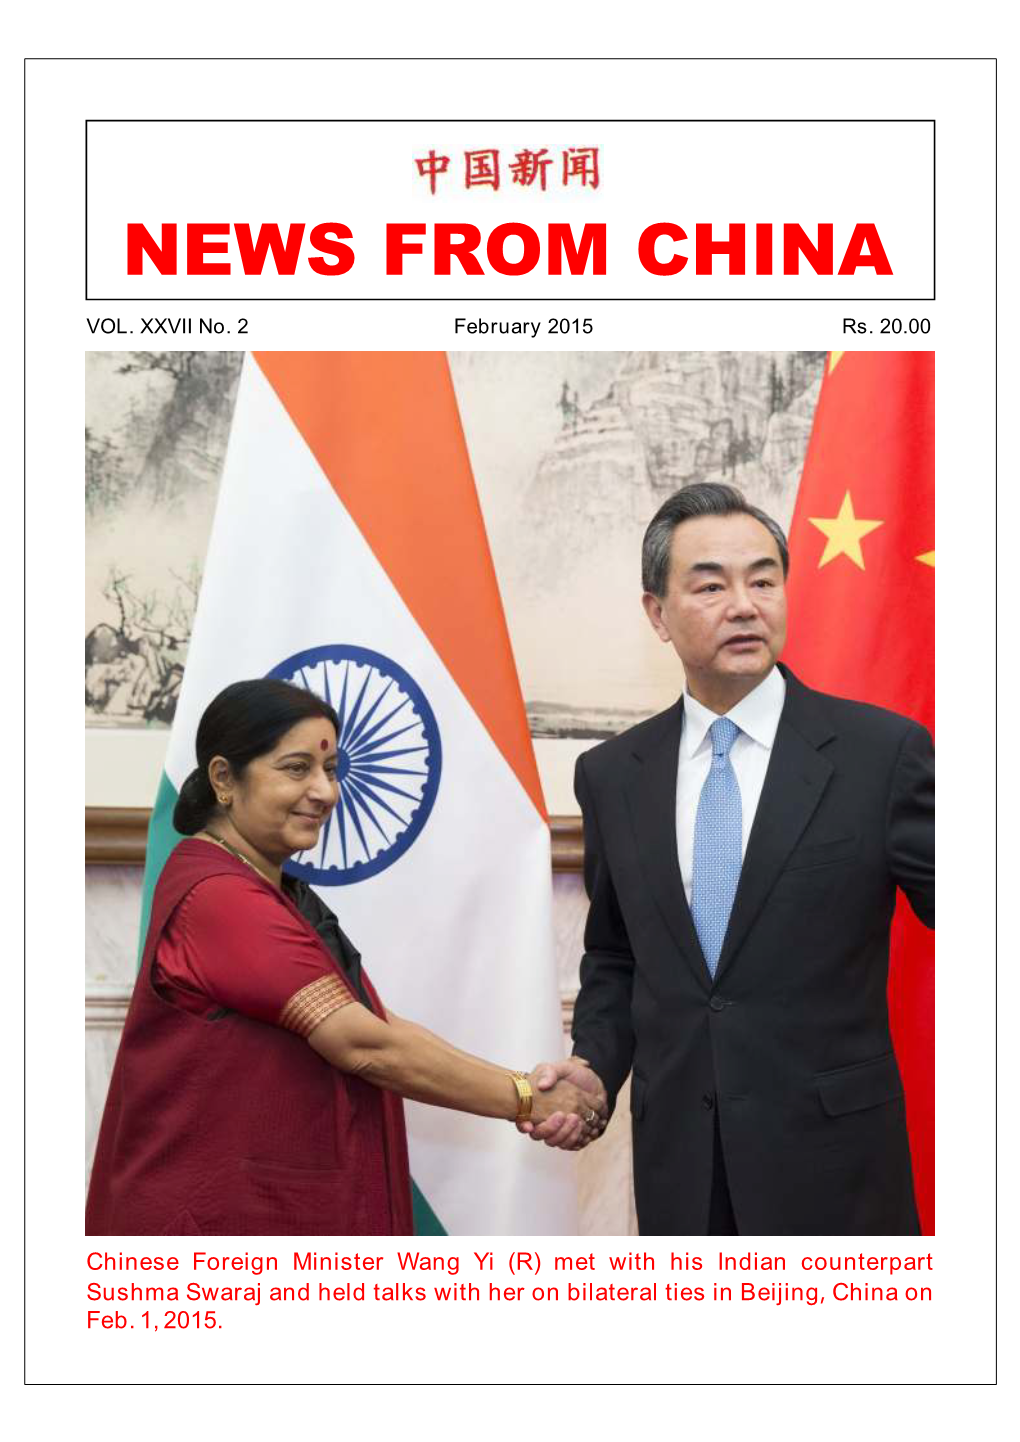 Chinese Foreign Minister Wang Yi (R) Met with His Indian Counterpart Sushma Swaraj and Held Talks with Her on Bilateral Ties in Beijing, China on Feb